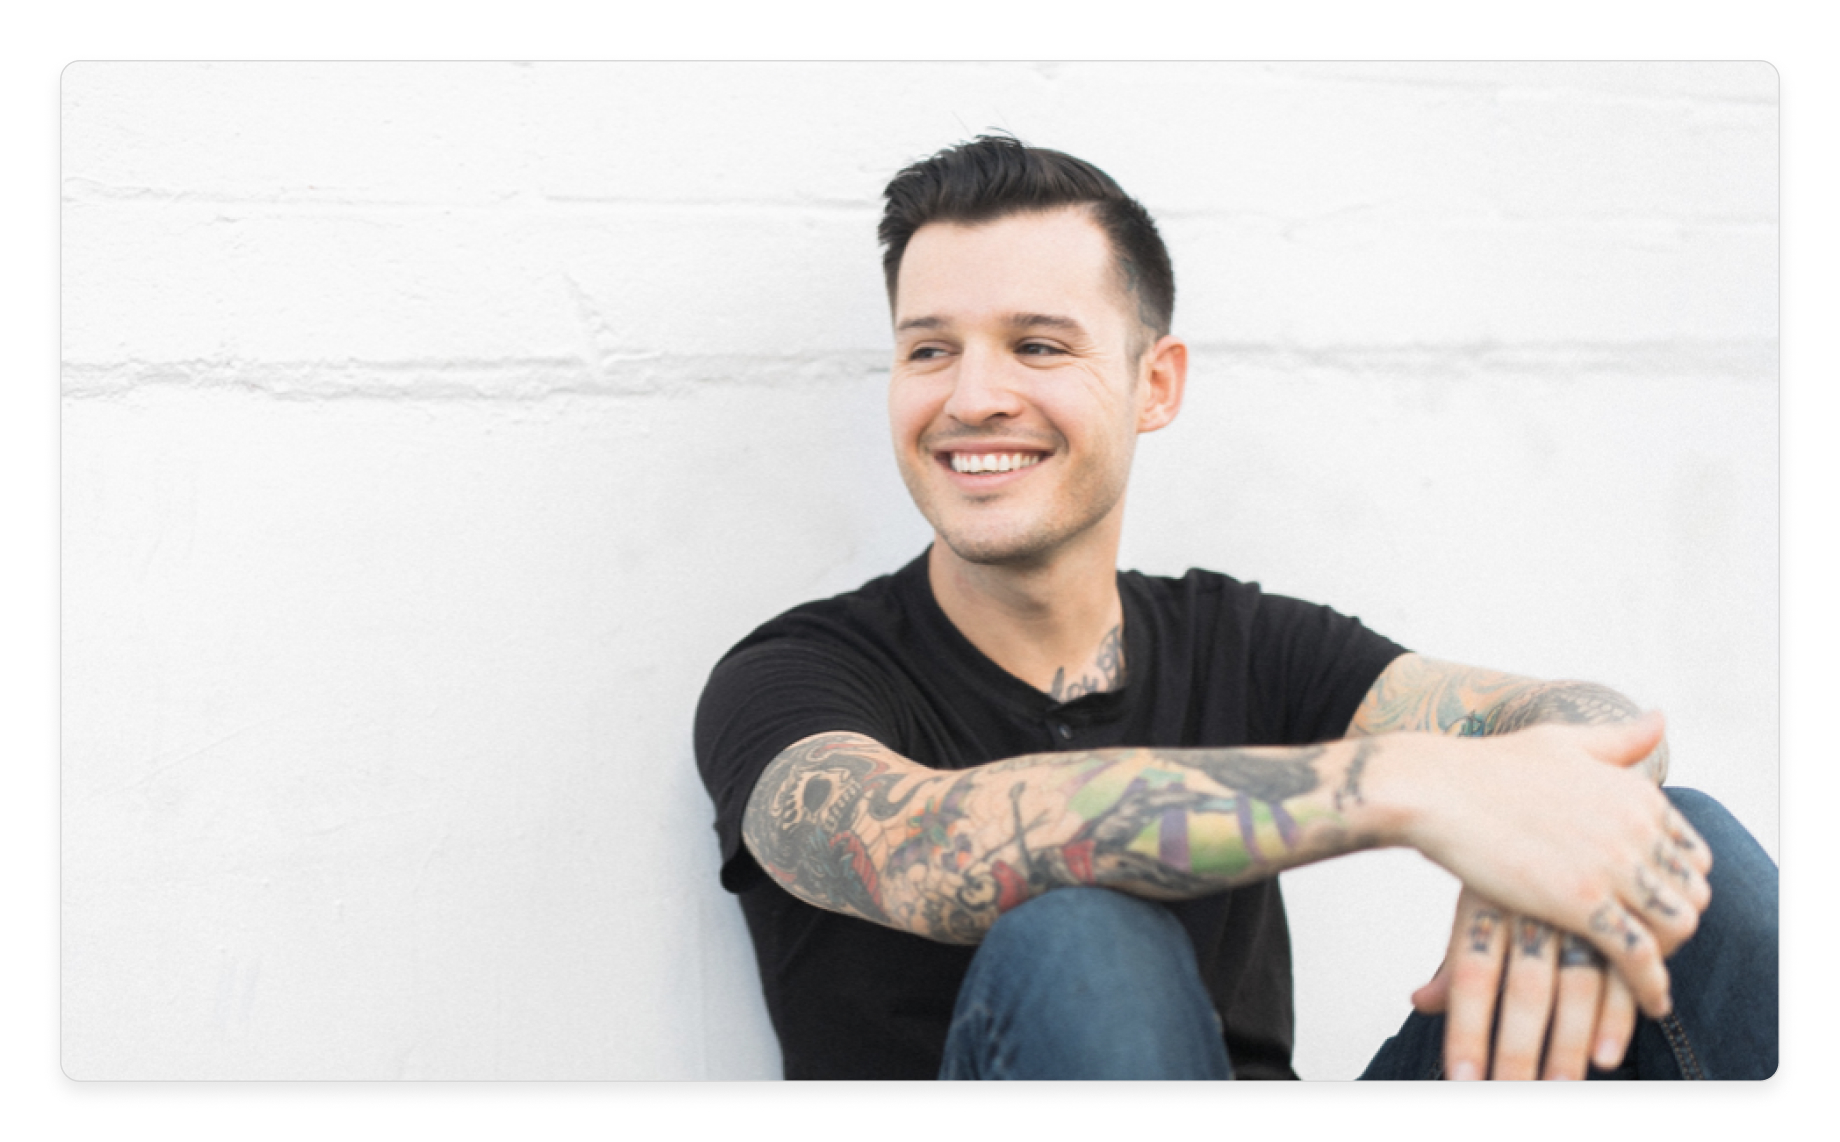 5 design influencers you need to know - Jesse Showalter 